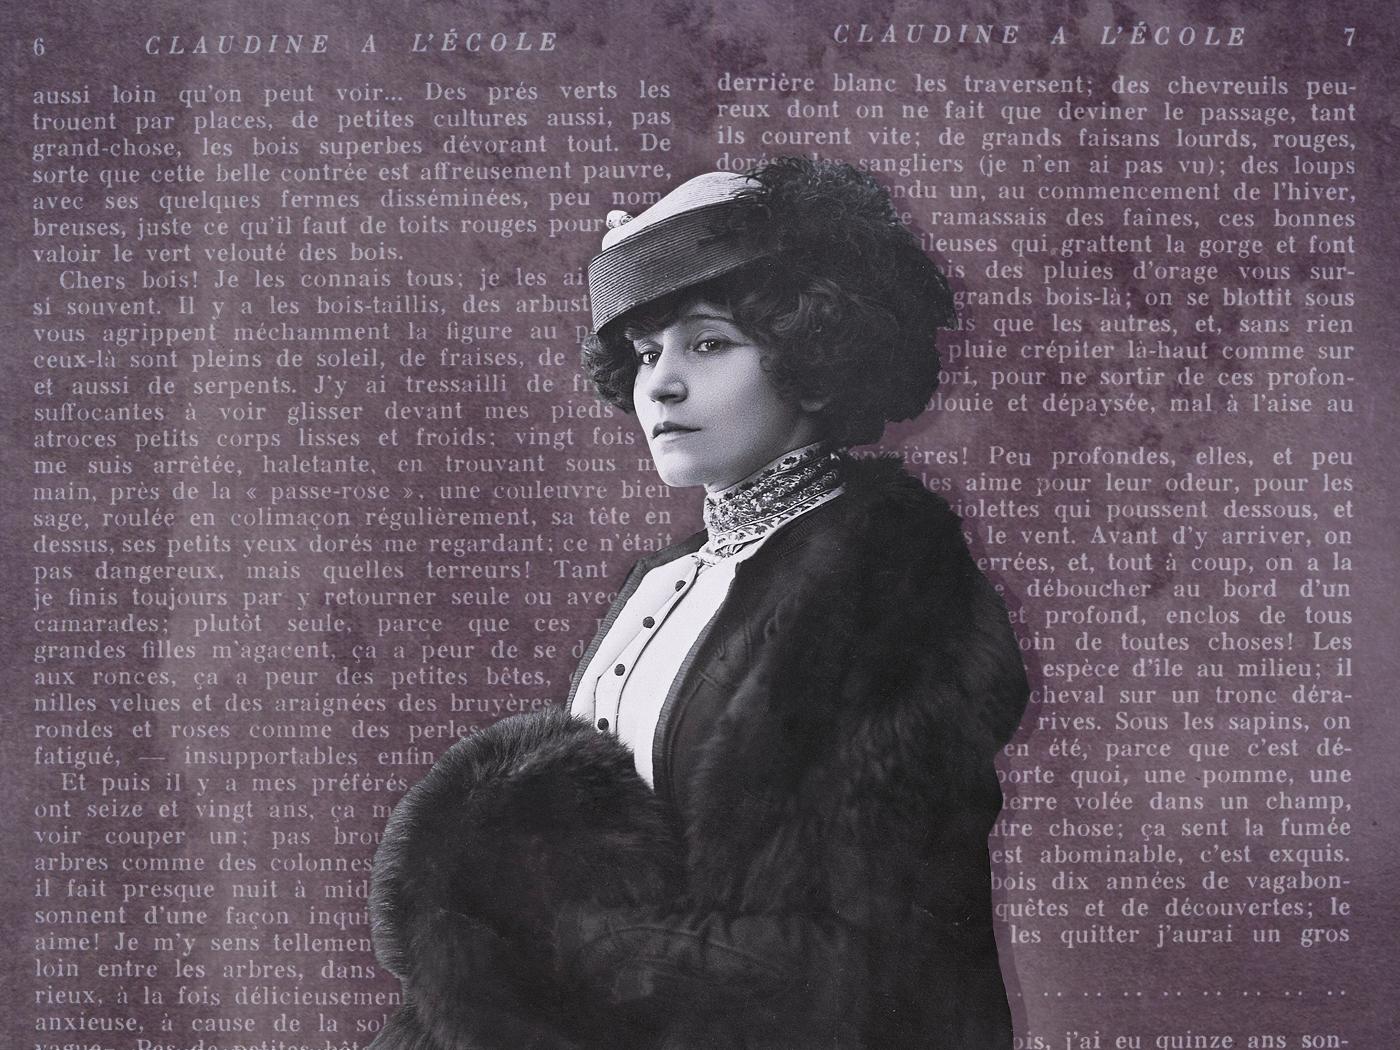 Colette Revolutionized French Literature With Her Depictions of Female Desire